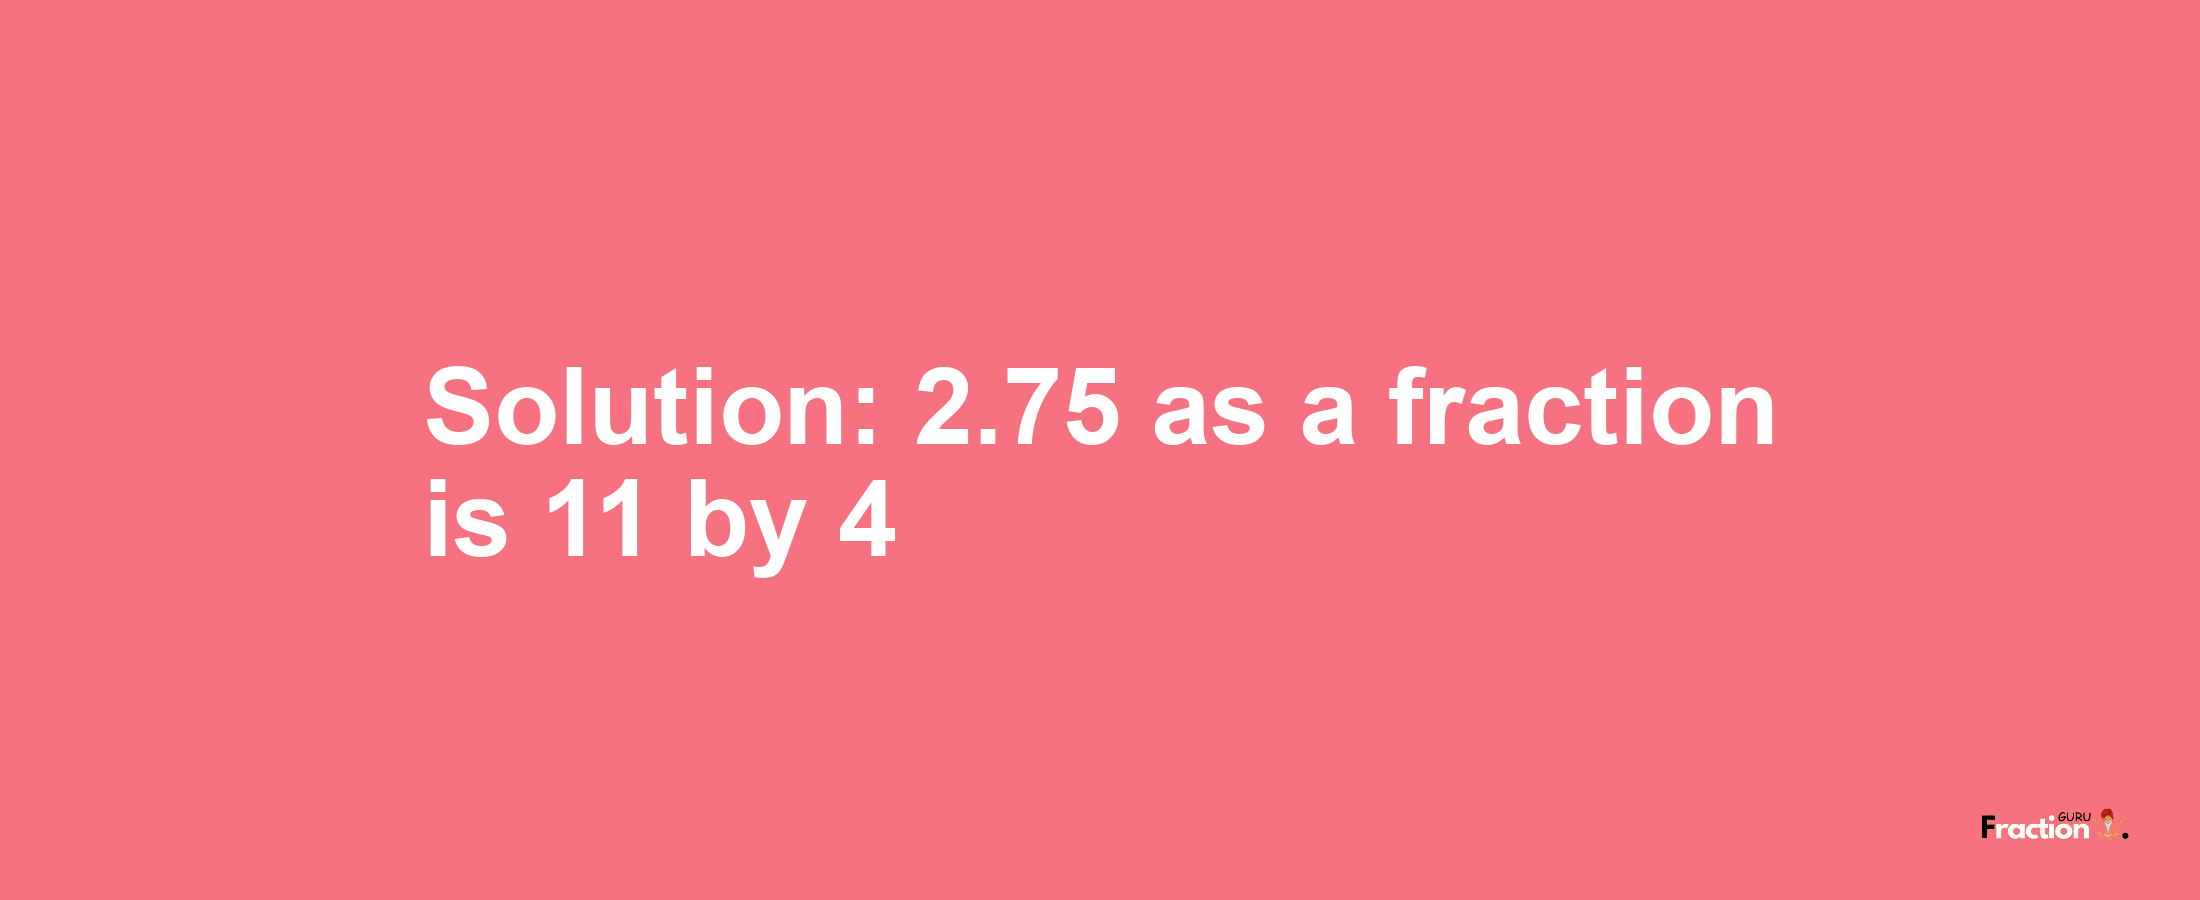 Solution:2.75 as a fraction is 11/4